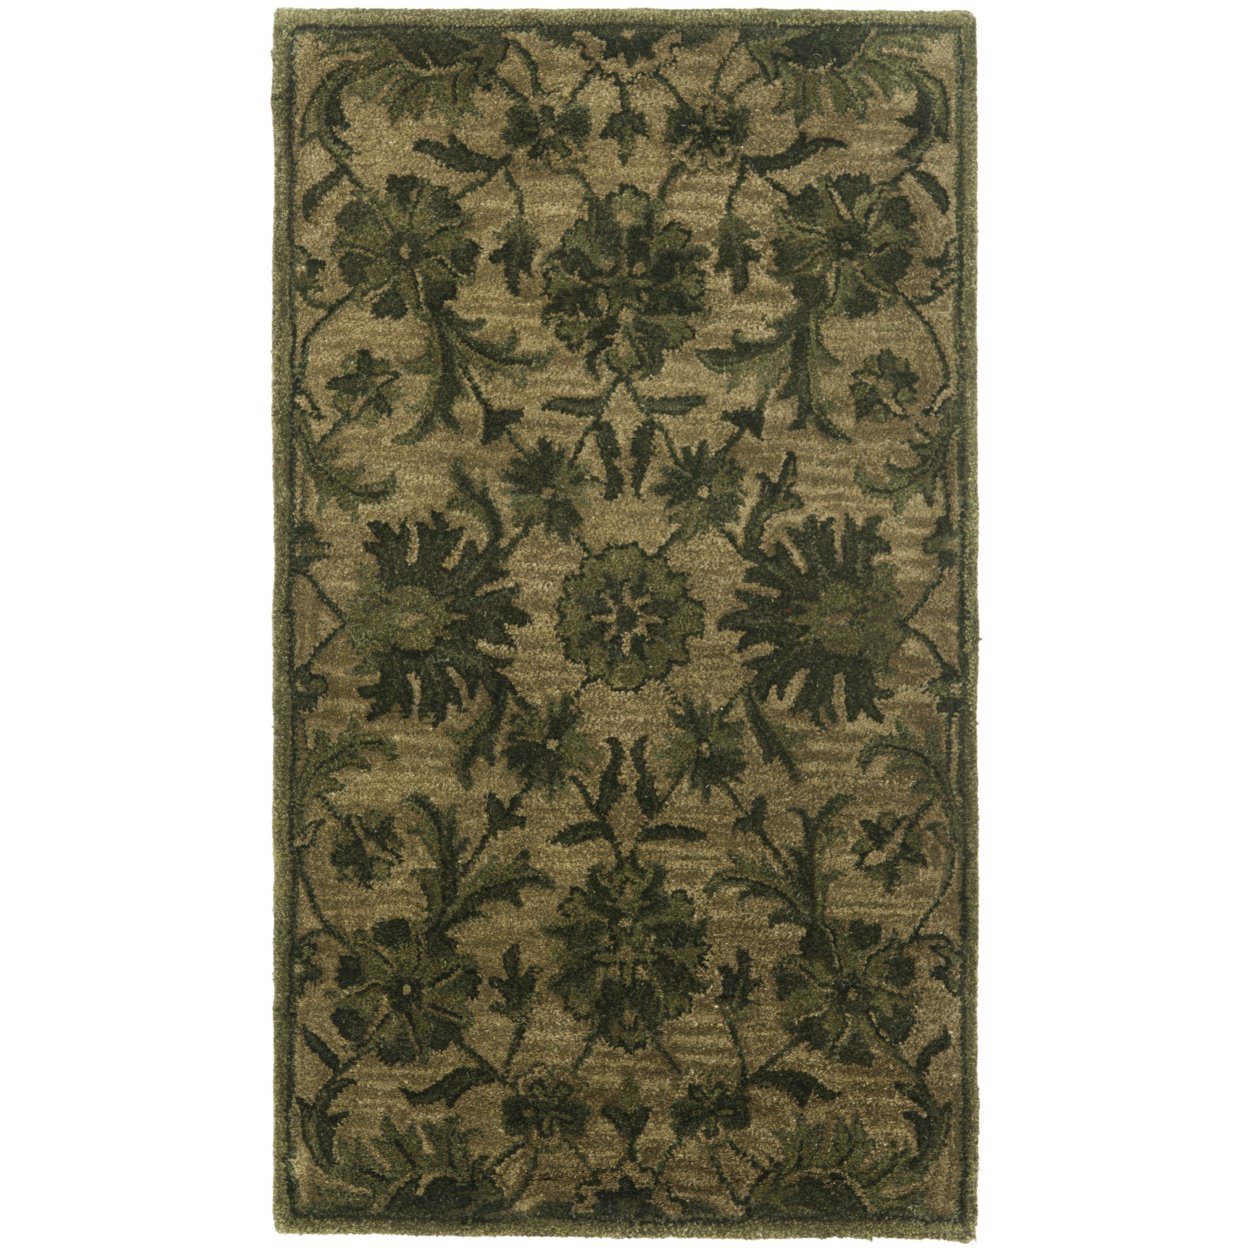 SAFAVIEH Antiquity AT824A Handmade Olive / Green Rug - 2' 3 X 4'